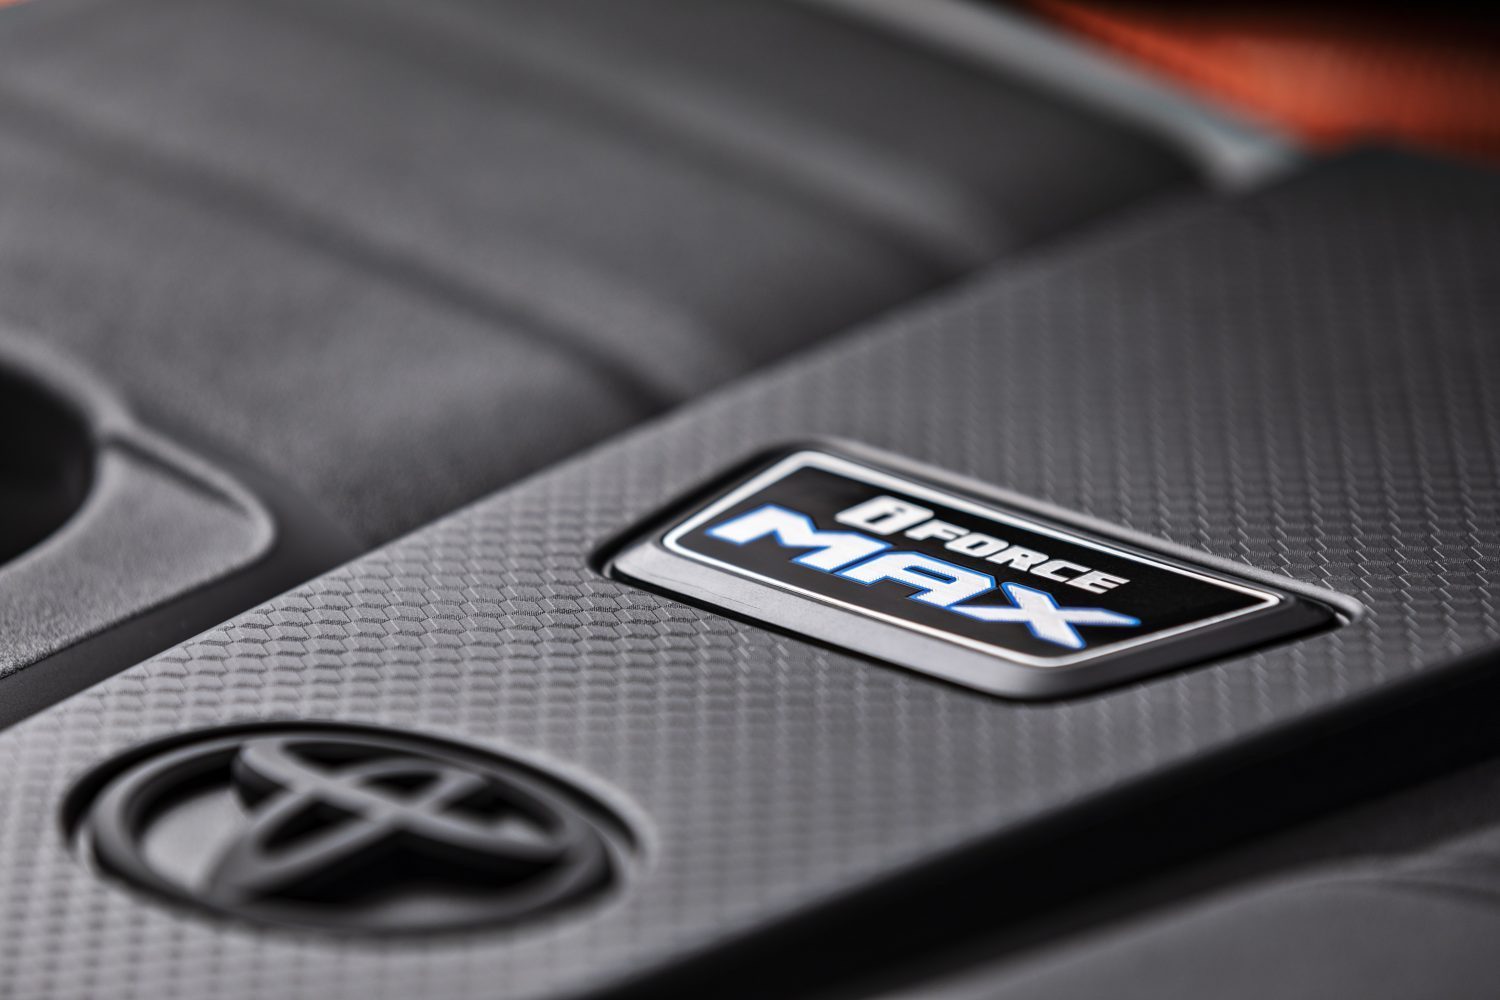 Detail shot of the engine cover of the Toyota Tundra's i-FORCE MAX hybrid V6 turbocharged engine.